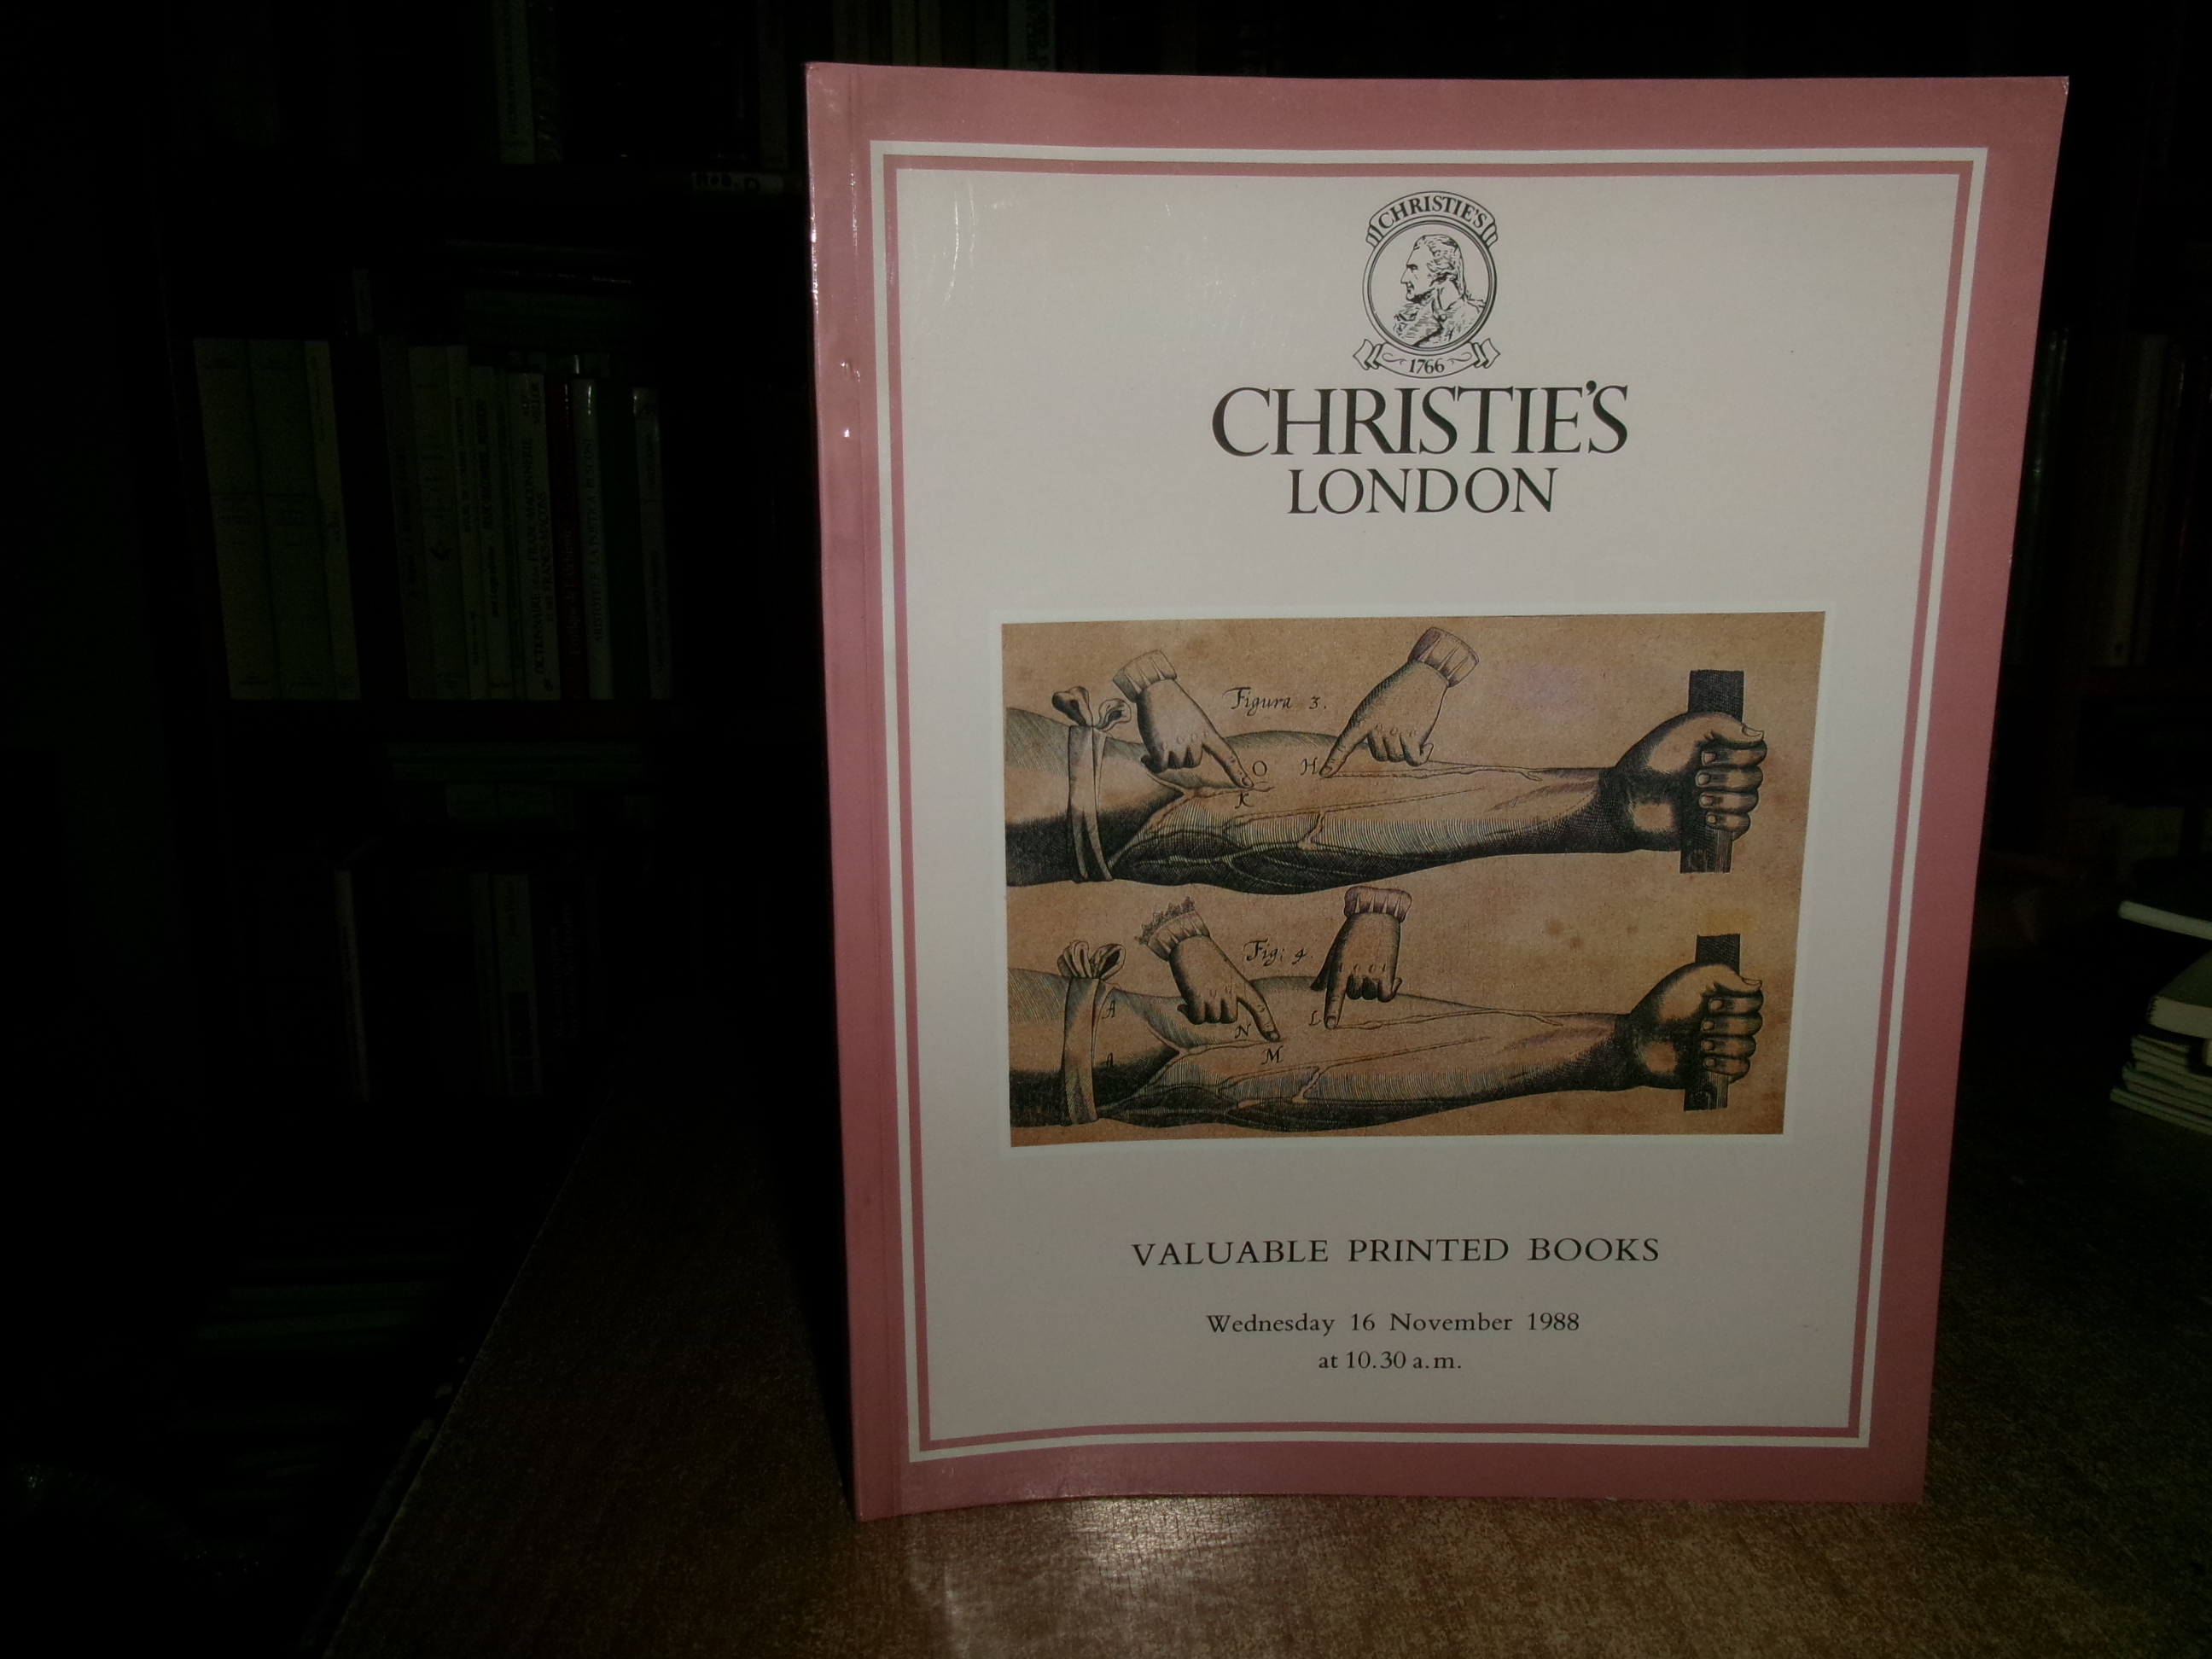 CHRISTIE'S LONDON Valuable Printed Books including Science, Medicine... 1988